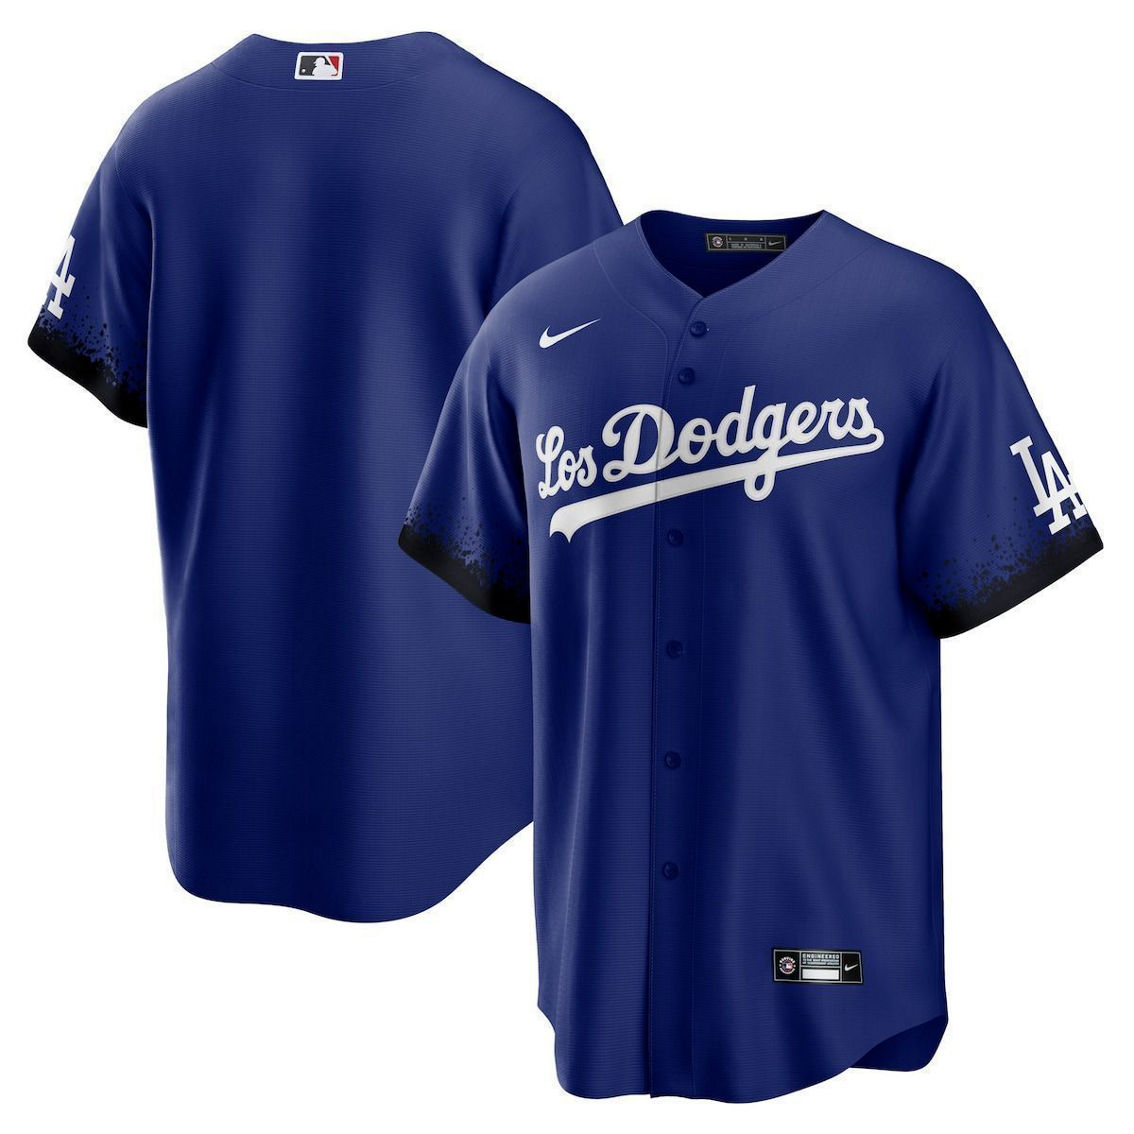 Nike Men's Royal Los Angeles Dodgers City Connect Replica Jersey - Image 2 of 4